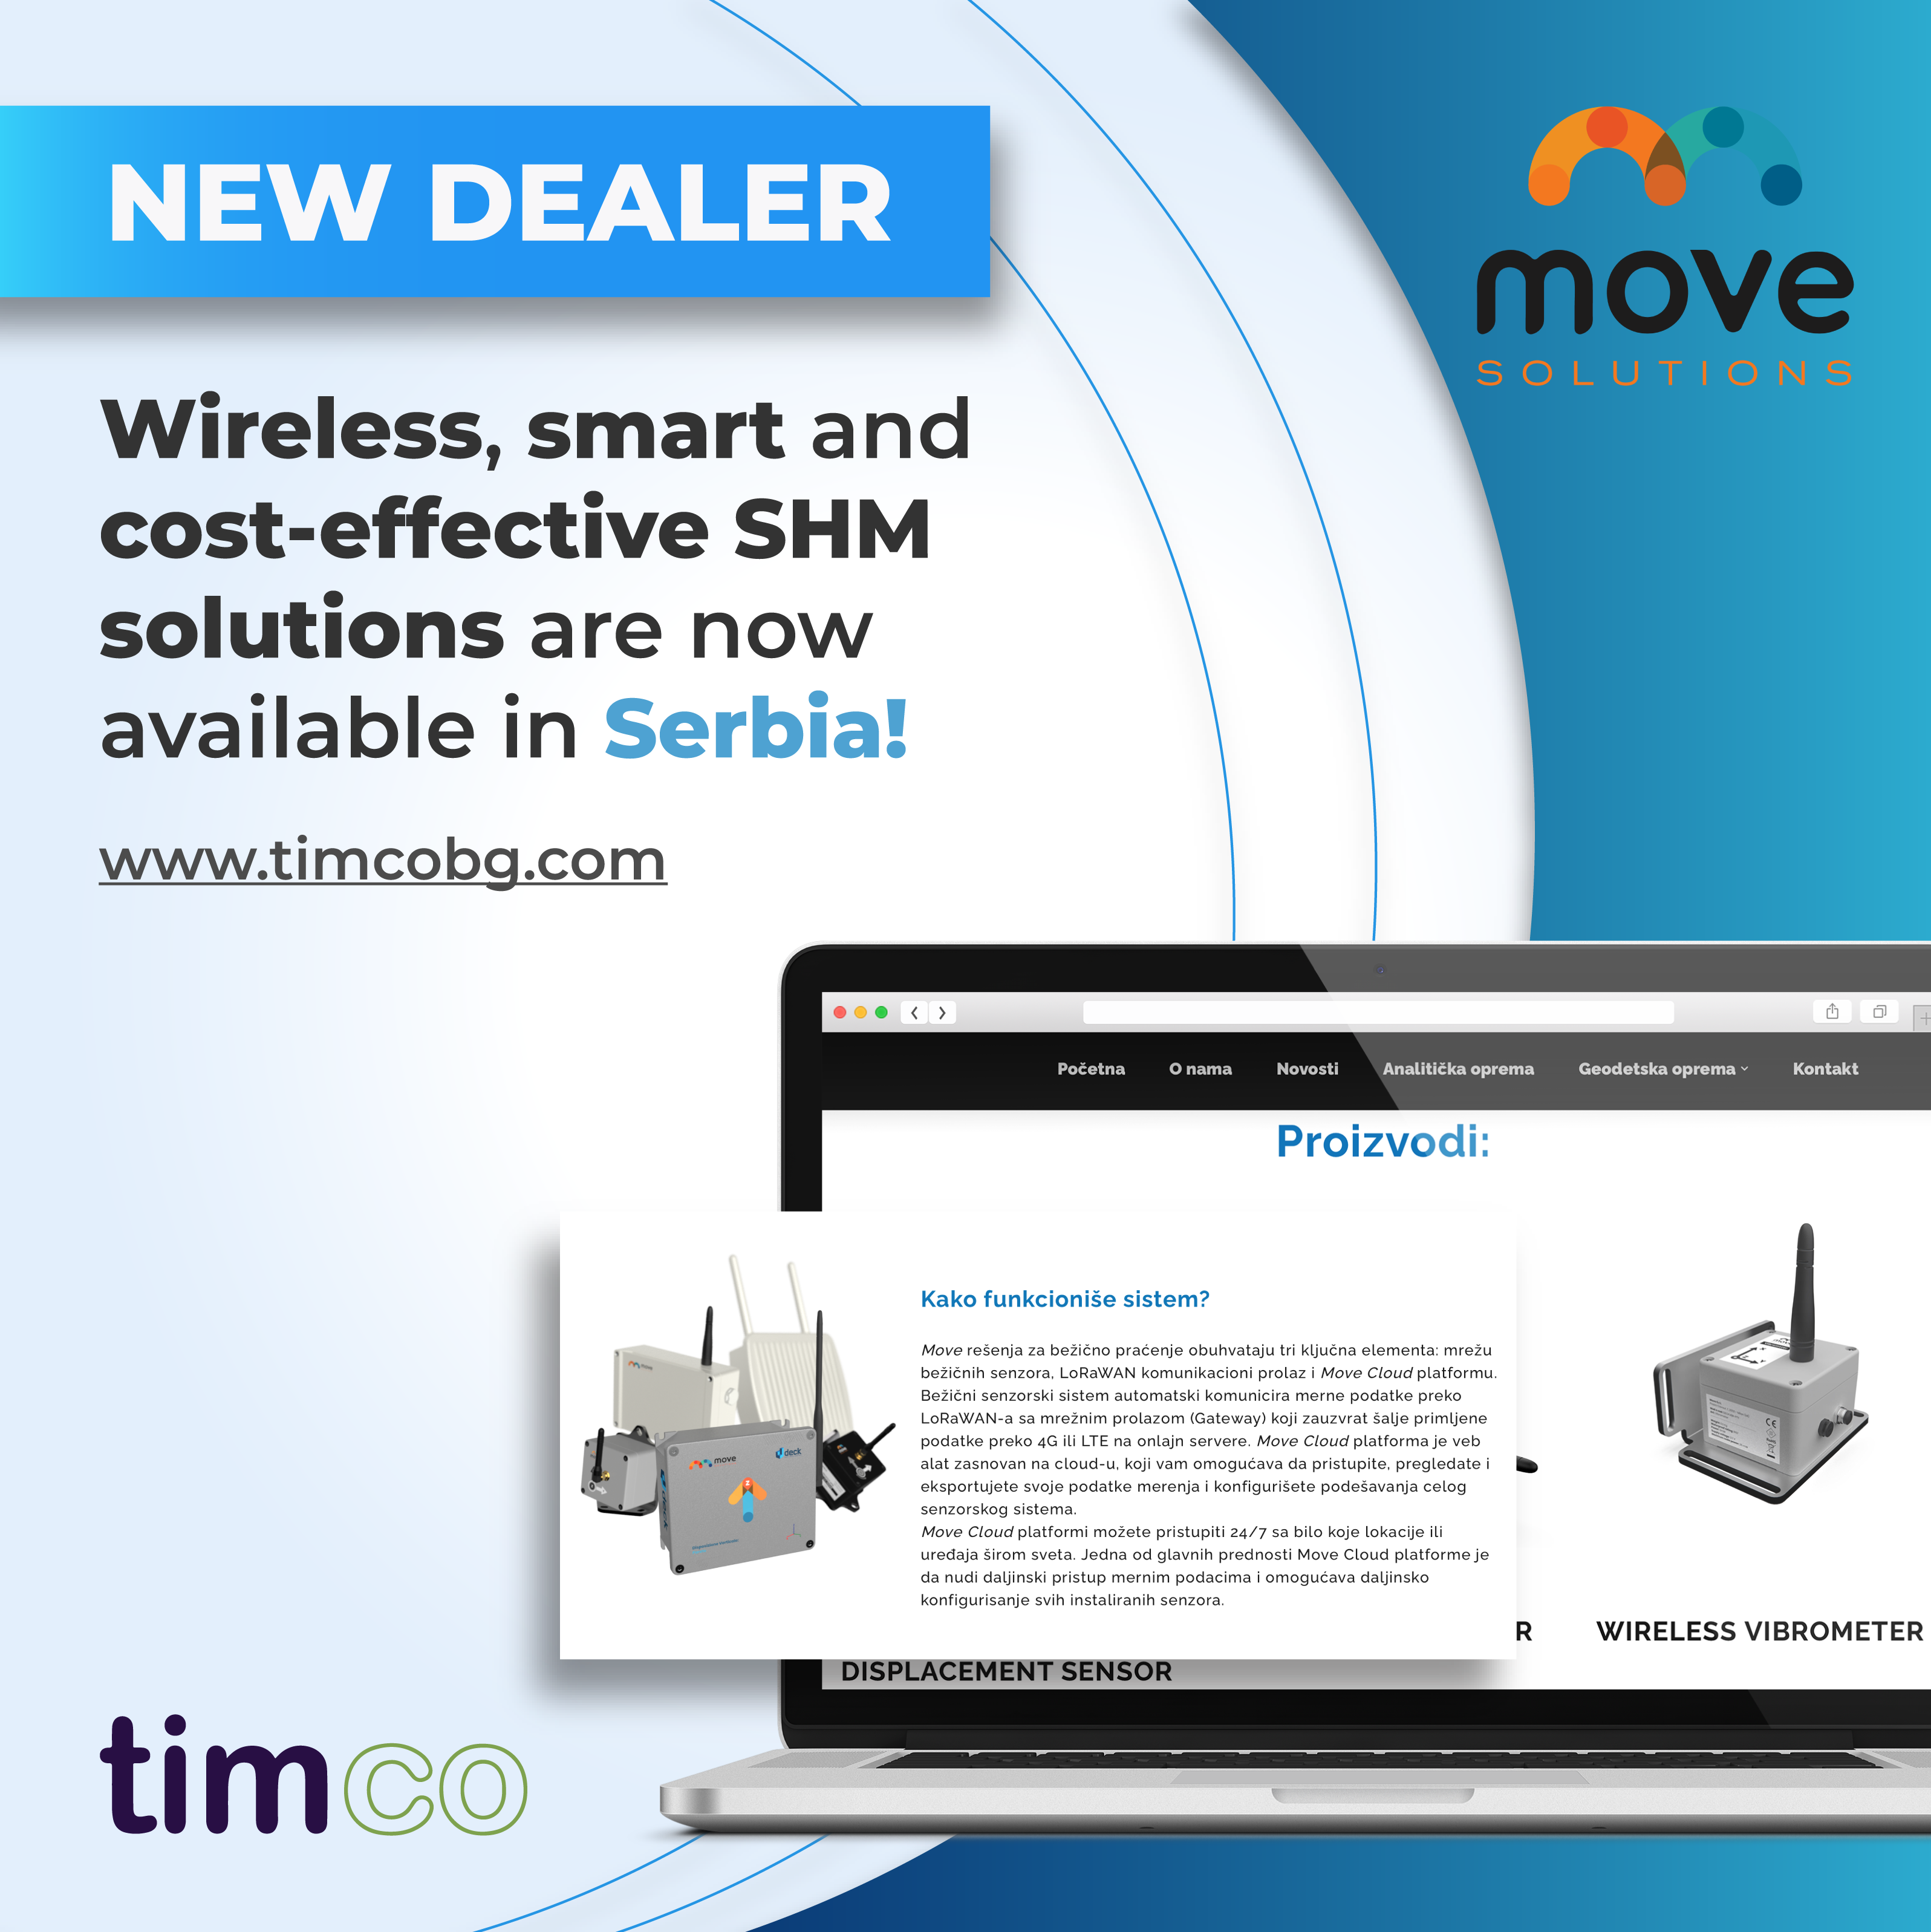 move solutions have a new dealer: timco